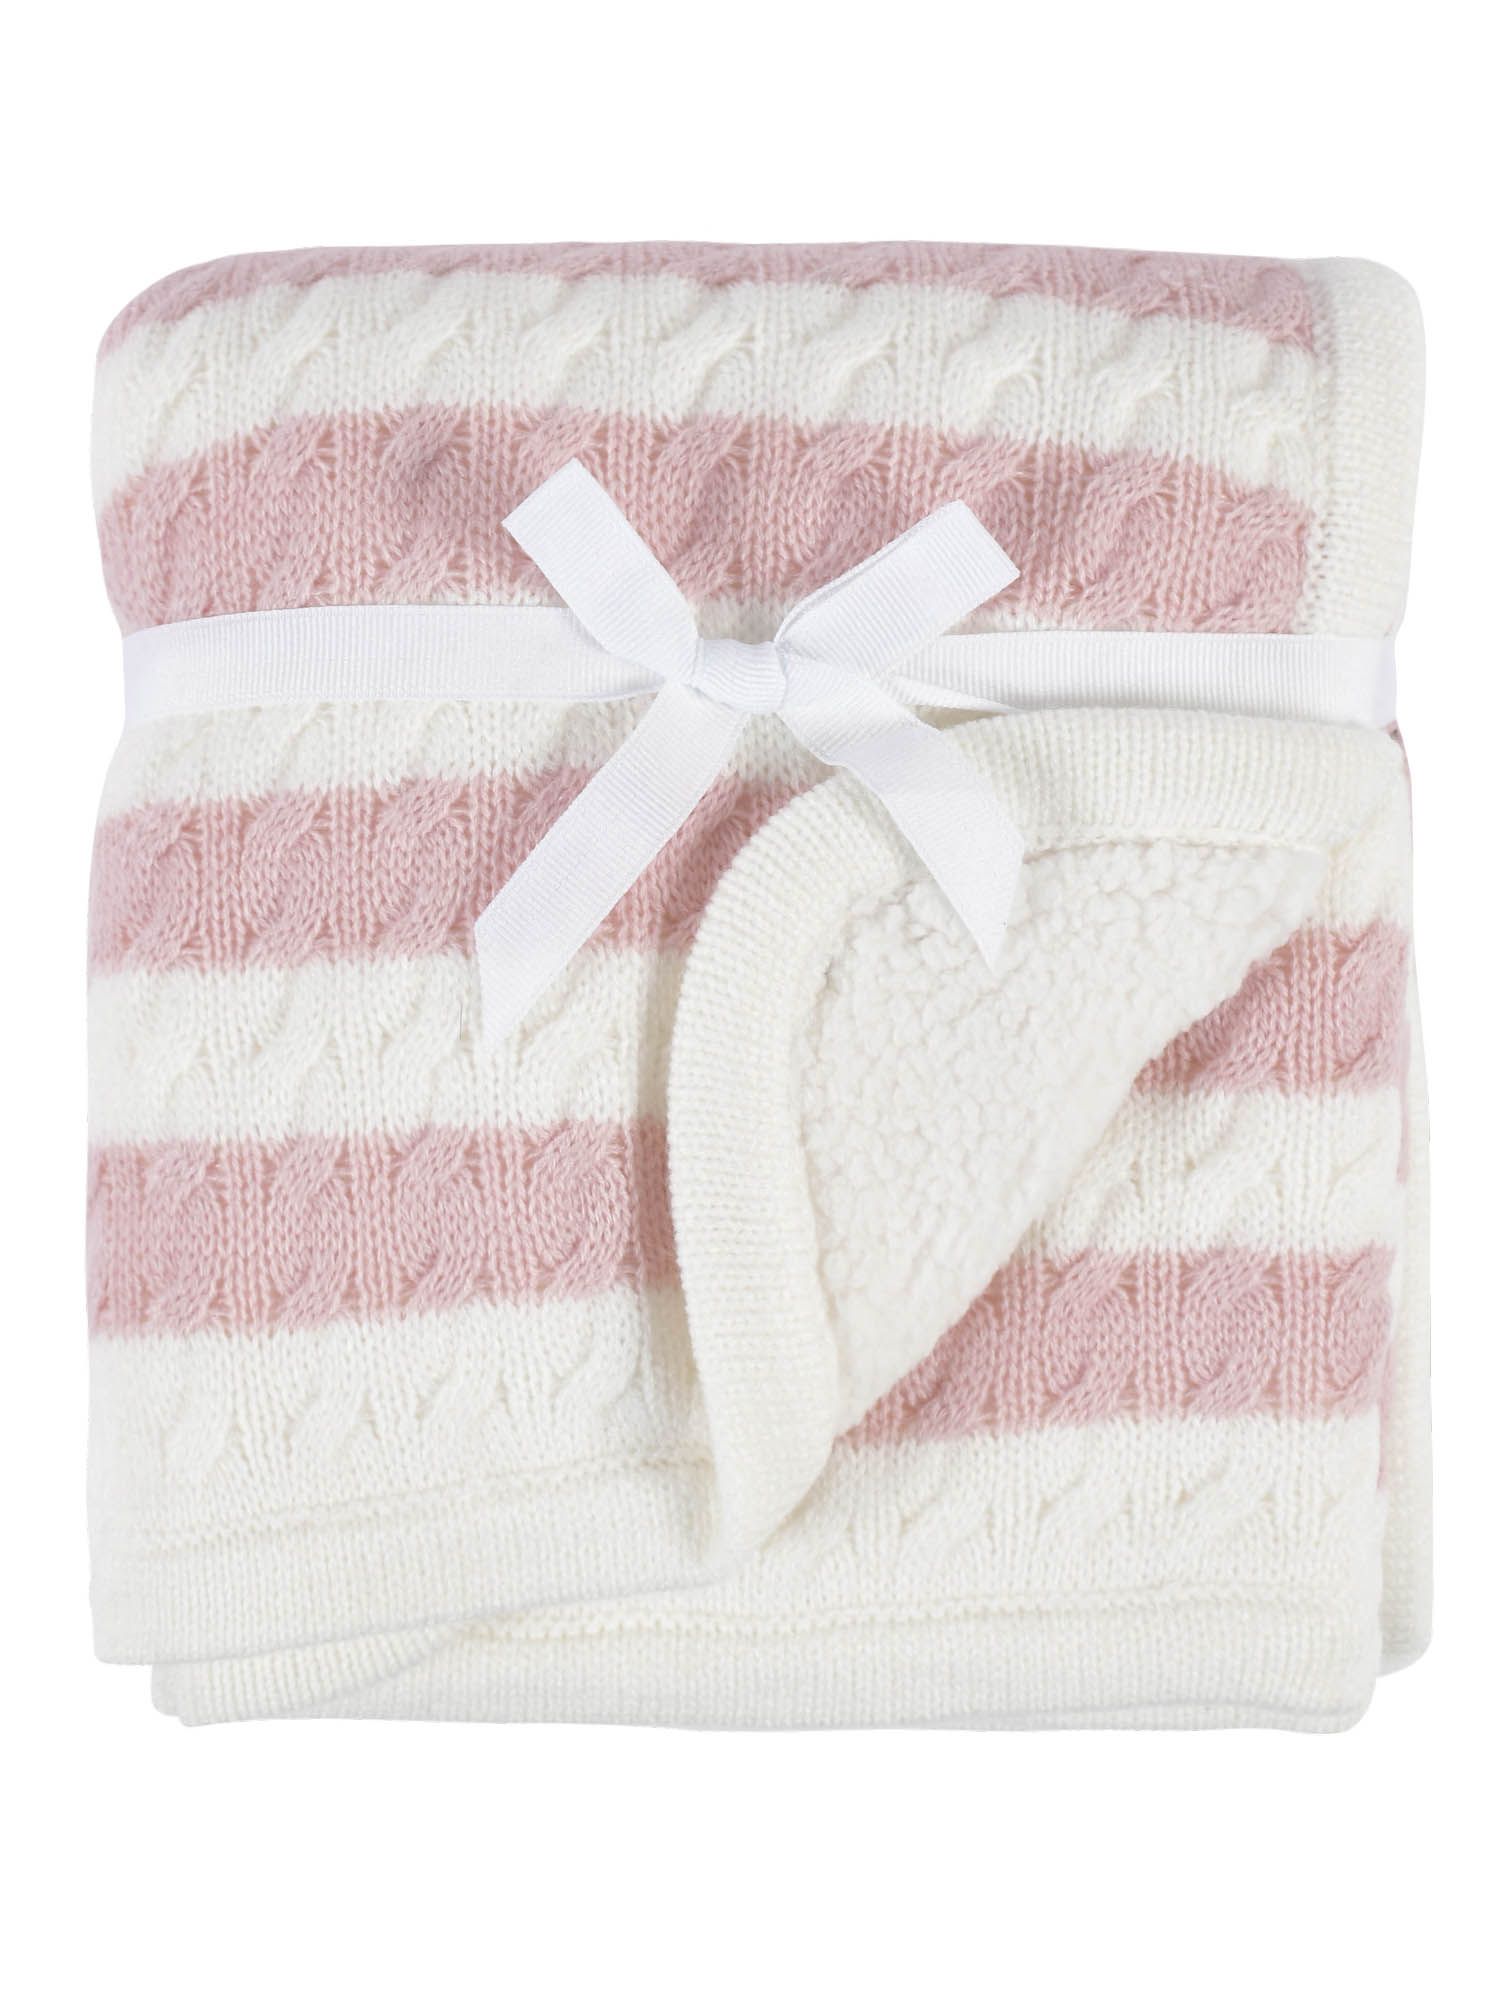 Modern Moments by Gerber Baby Girls Pink Cable Knit Blanket | Walmart (US)